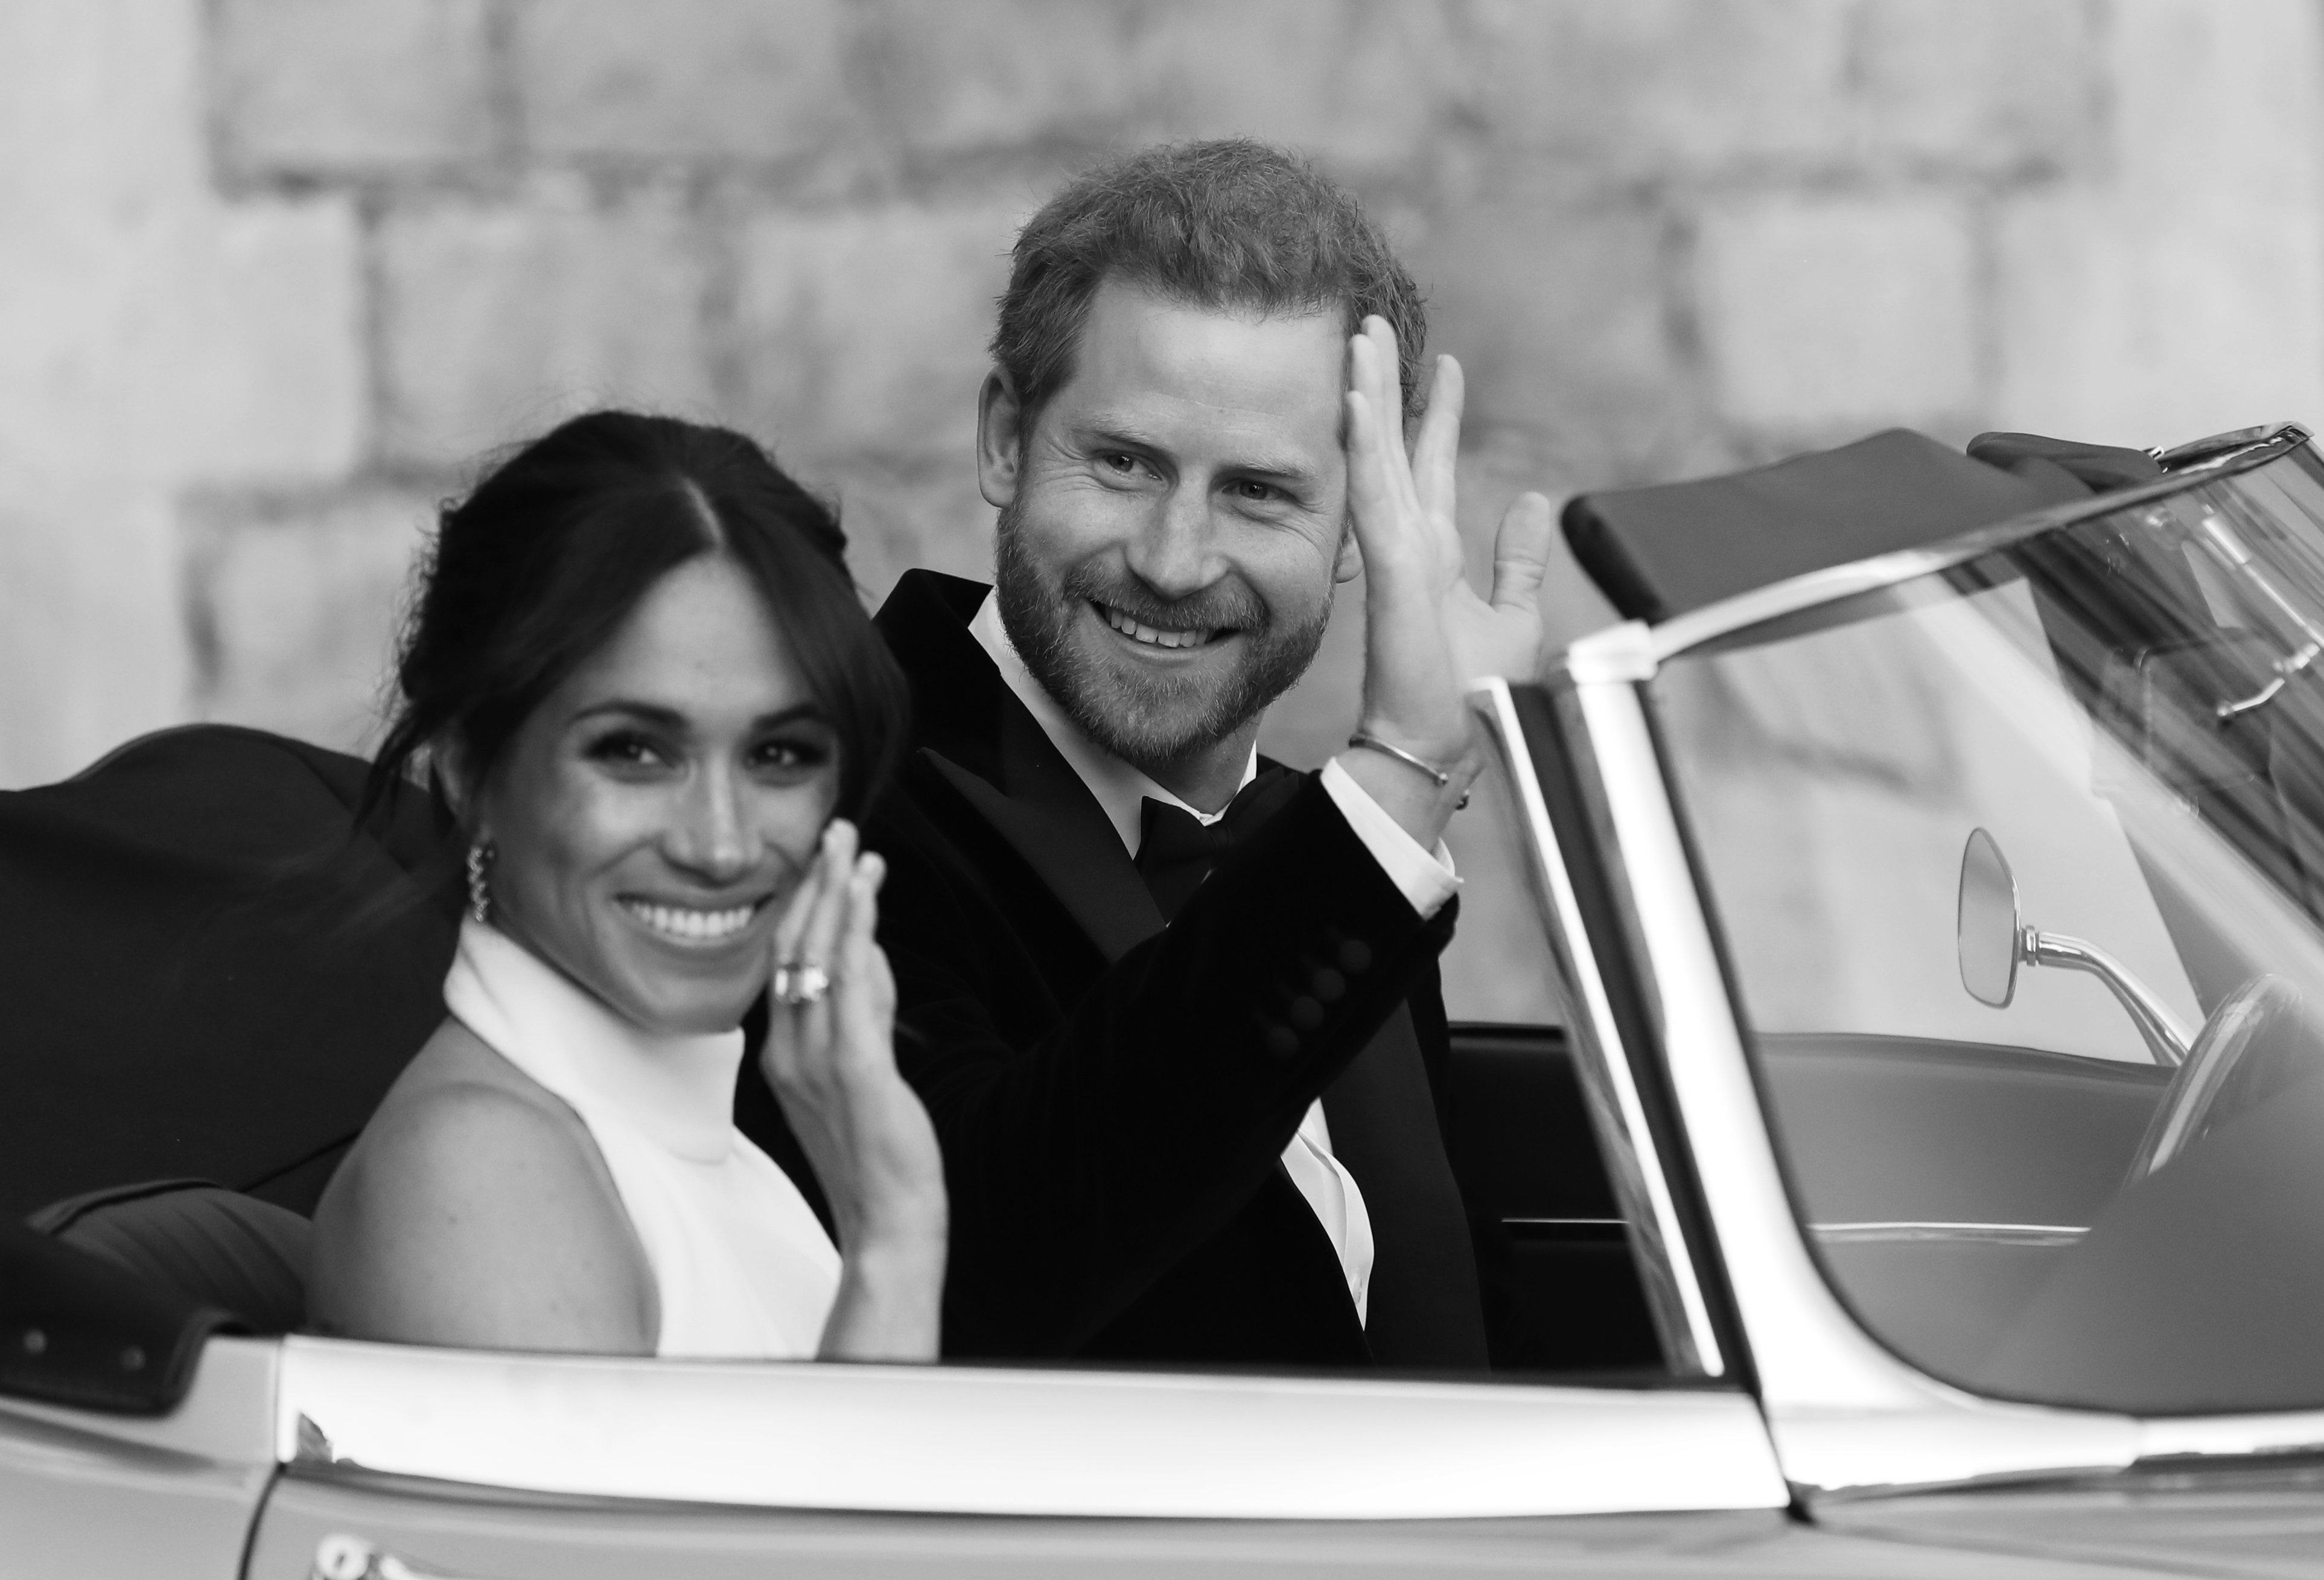  Prince Harry and Meghan Markle leave Windsor Castle in Windsor on May 19, 2018 in an E-Type Jaguar after their wedding to attend an evening reception at Frogmore House | Source: Getty Images 